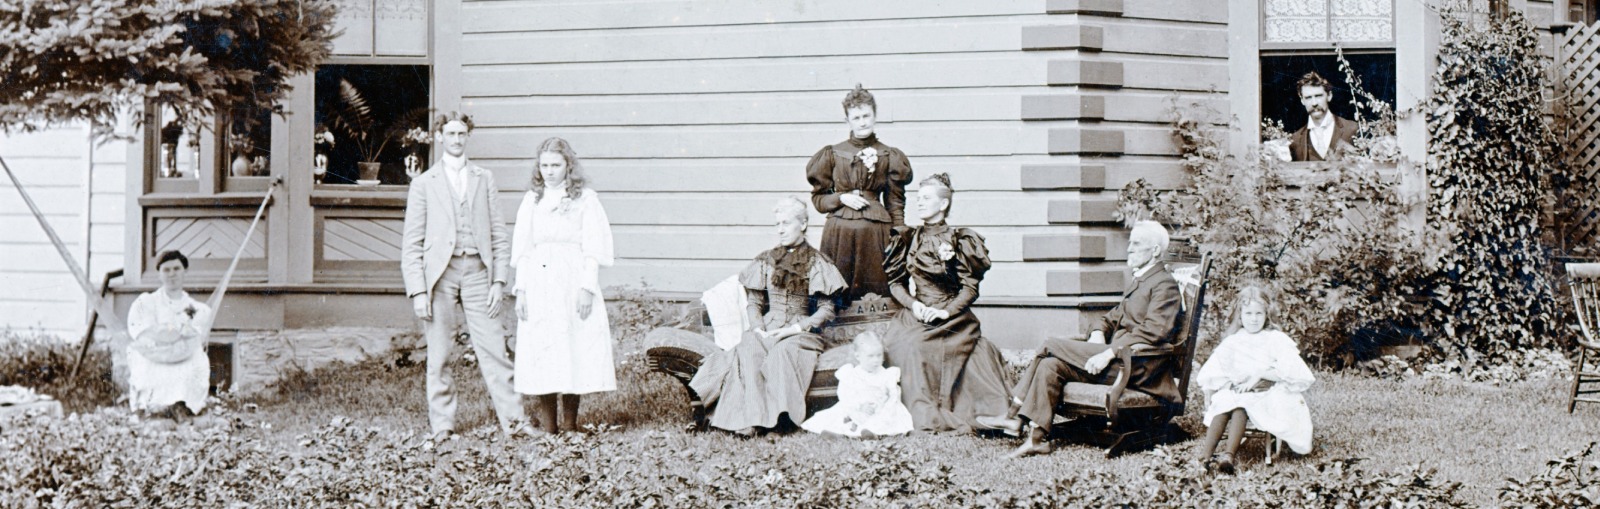 Black and white photo of a family posing outside their home.